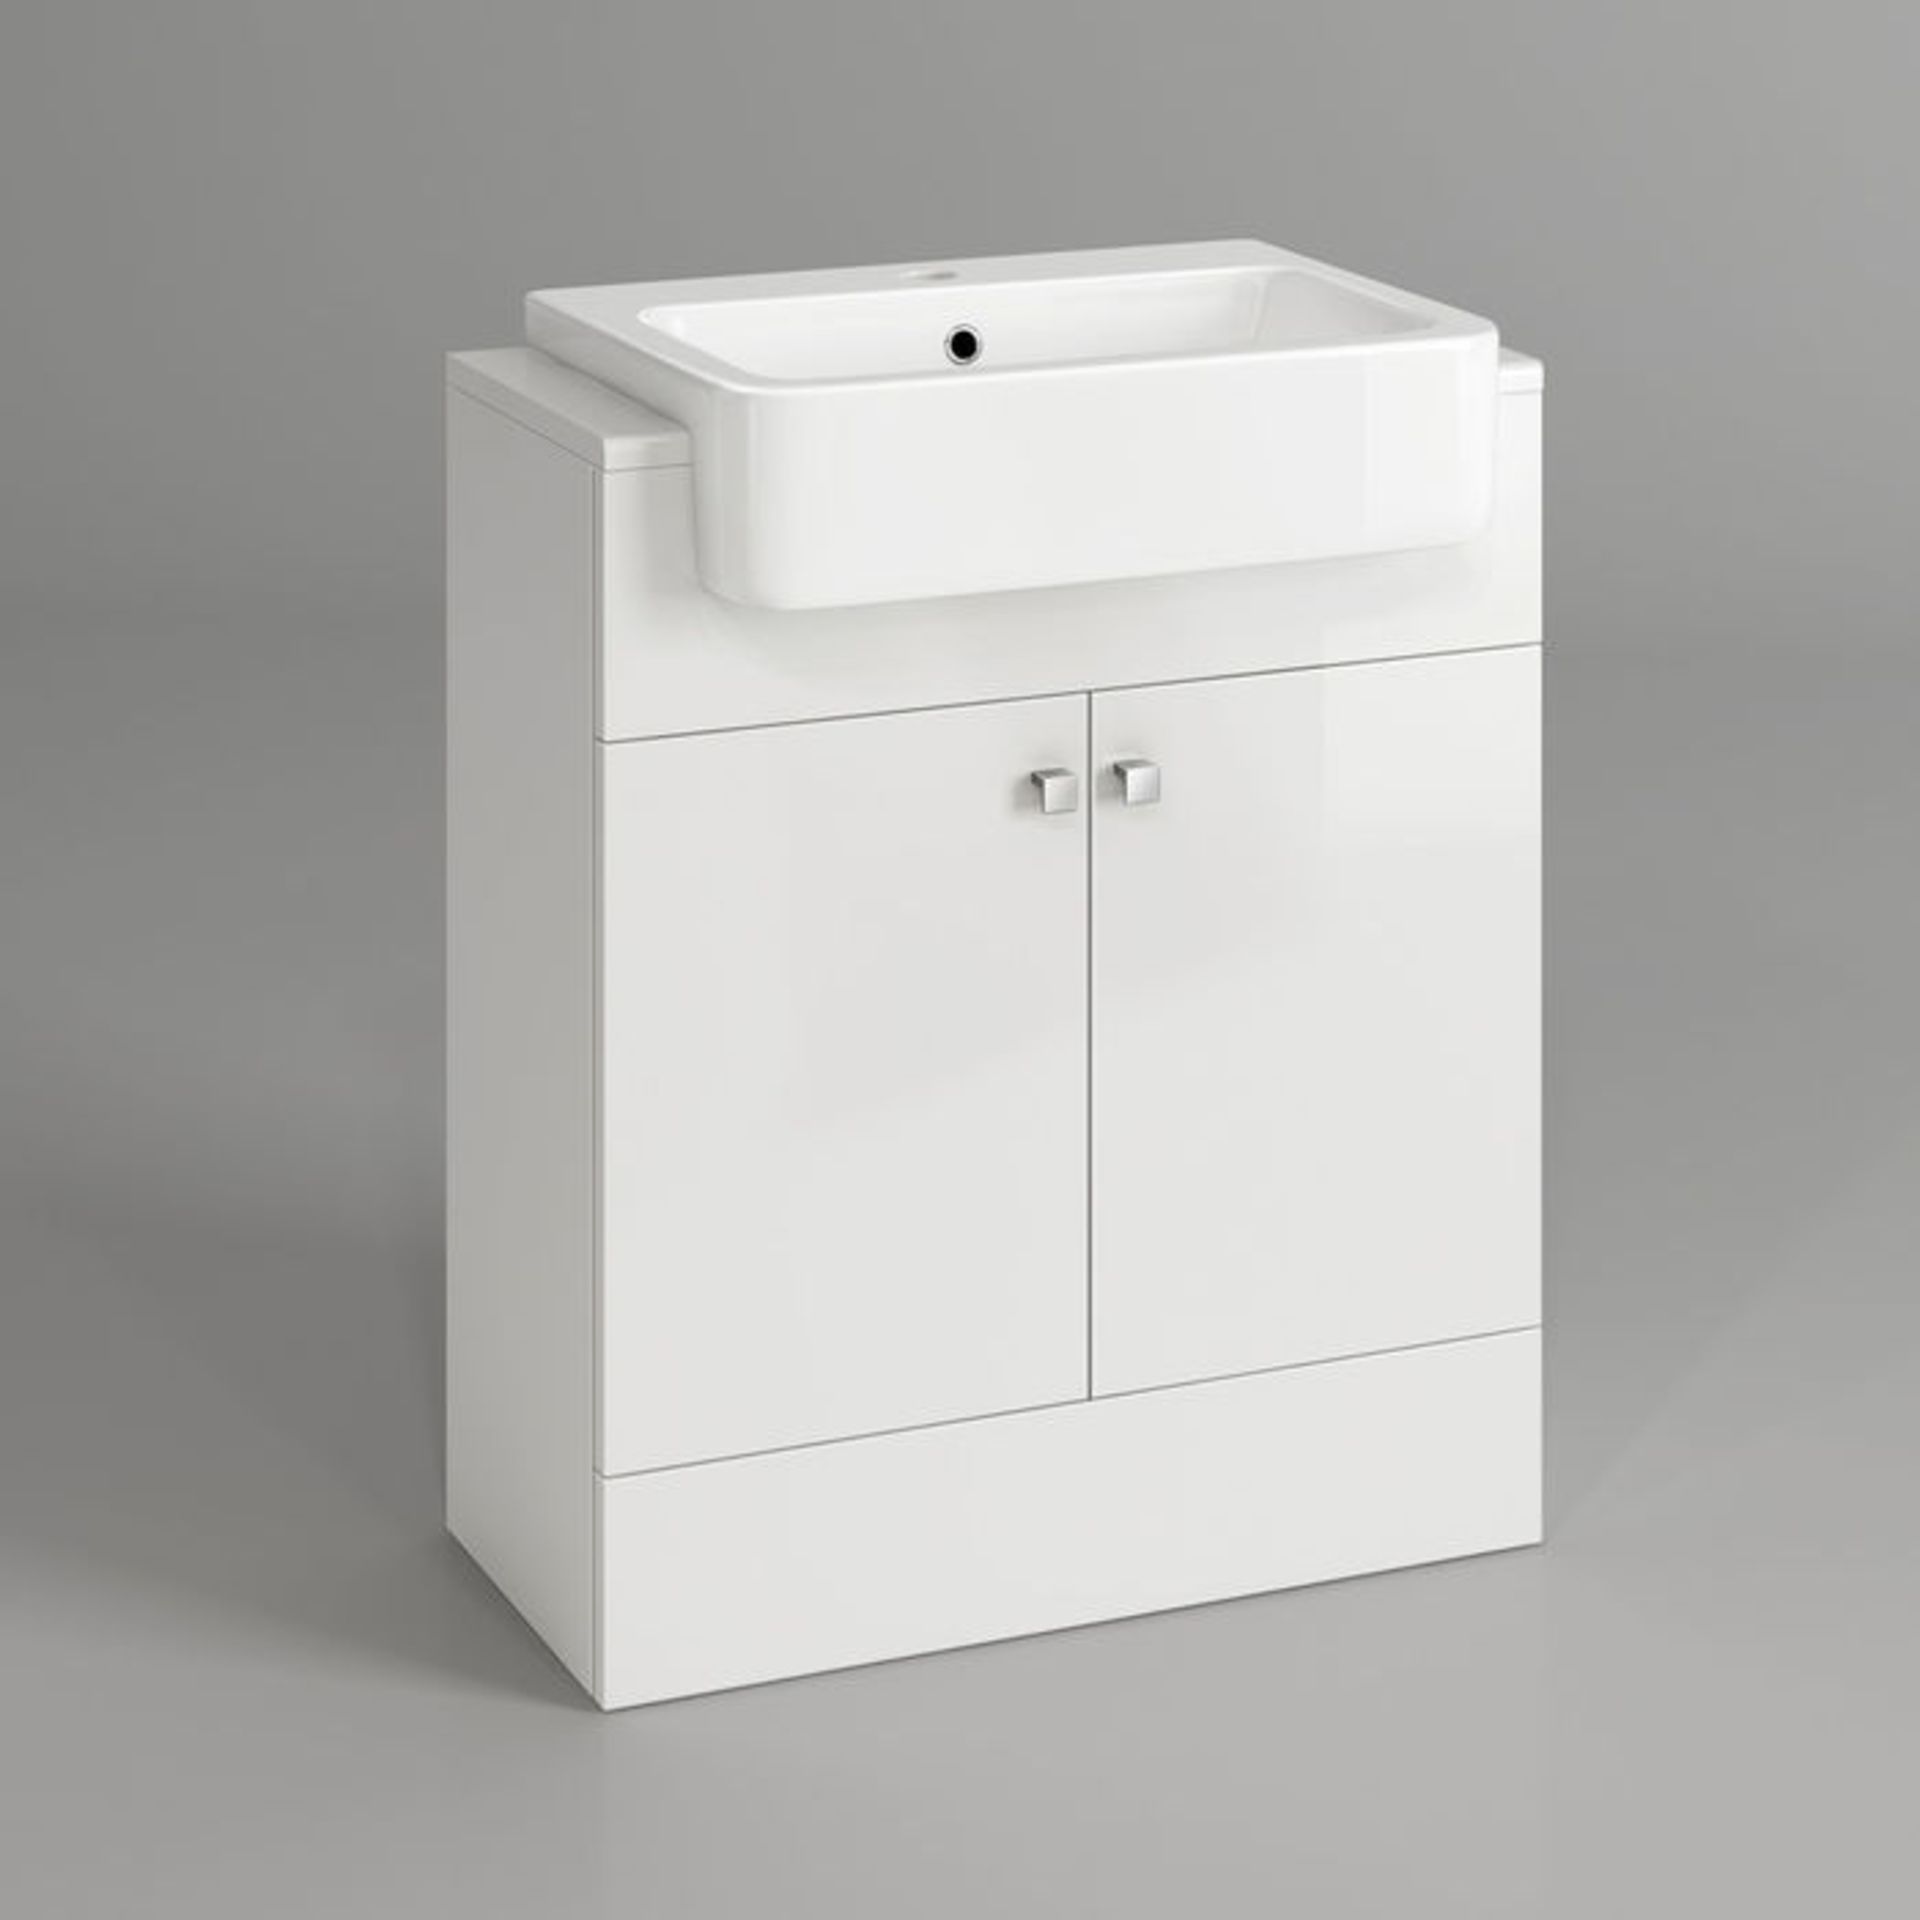 (P272) 660mm Harper Gloss White Basin Vanity Unit - Floor Standing. RRP £499.99. Comes complete with - Image 3 of 4